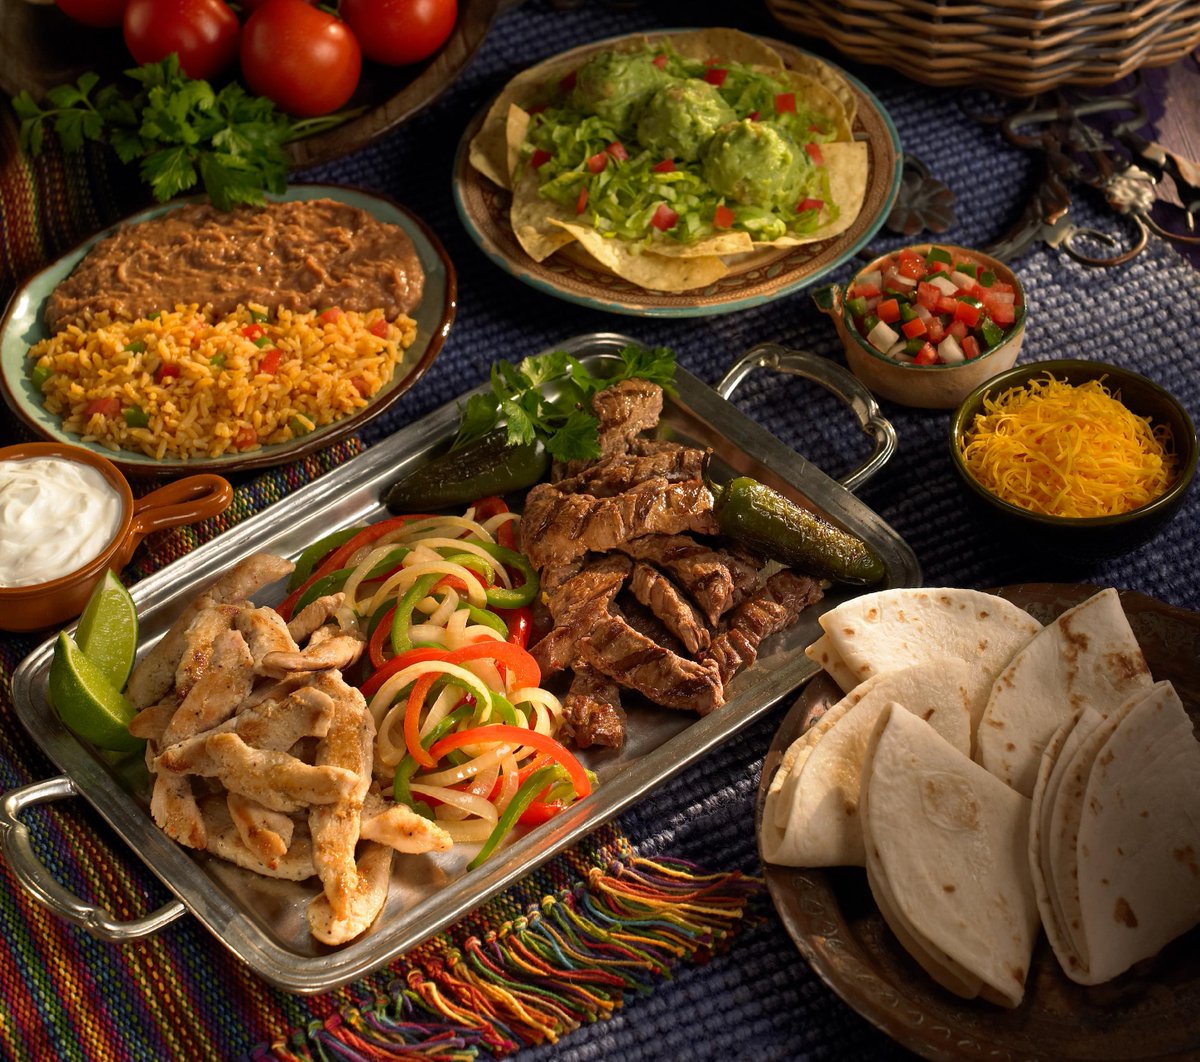 Let the fiesta begin!🎉 Our sizzling fajitas are perfect for your Cinco de Mayo celebration. Swing by the drive-thru or place your pick-up order online today!

#cincodemayo #rosascafeandtortillafactory #madefromscratch #restaurant #vip #authentic #tacos #mexicanfood #rosas #qu...